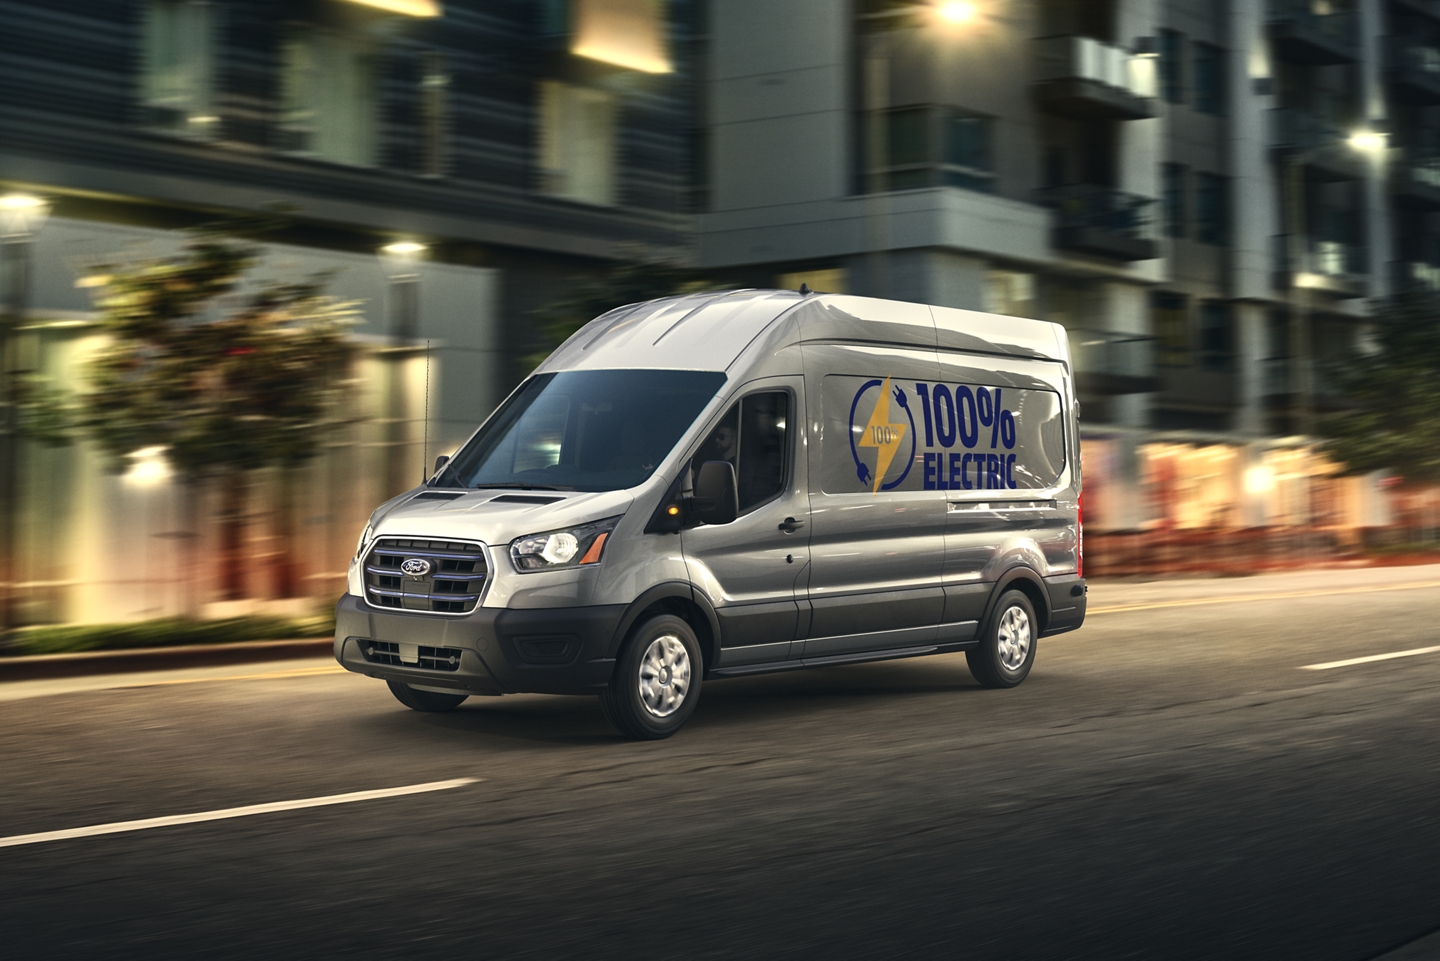 Photo of the Ford Transit Electric on the road at night